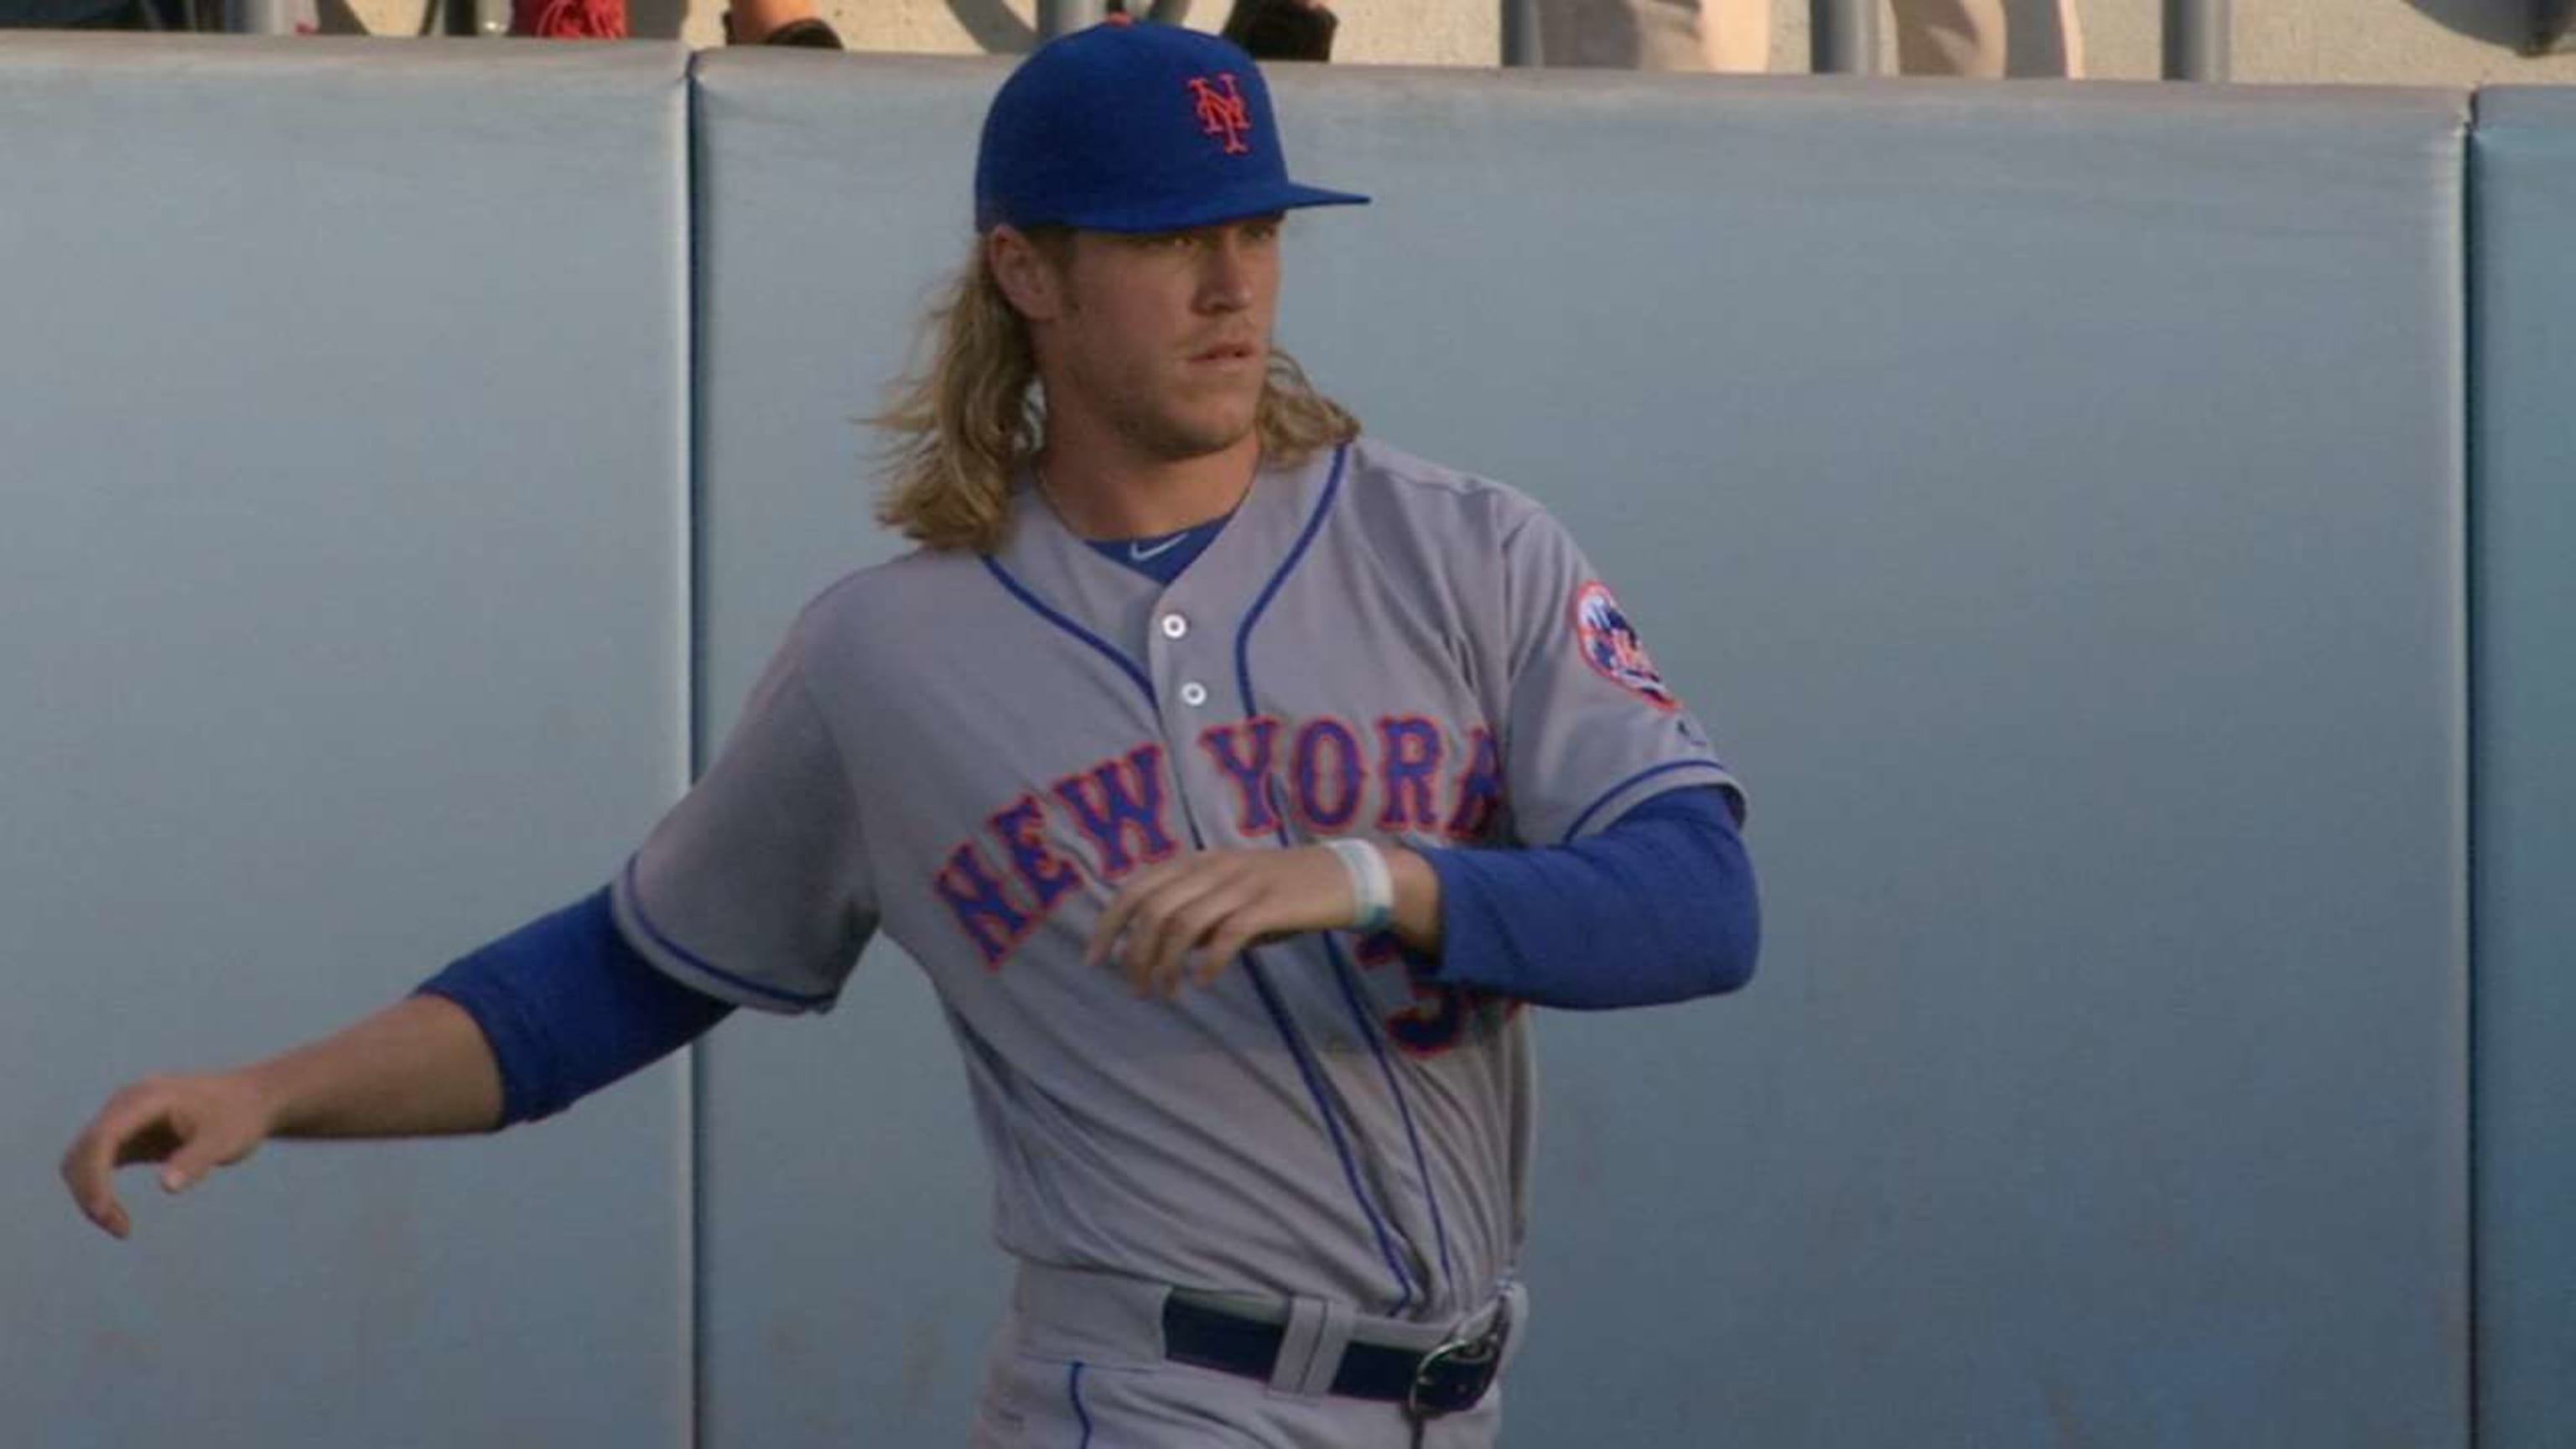 Ode to a Pitcher: Noah Syndergaard blasts a home run, shuts out